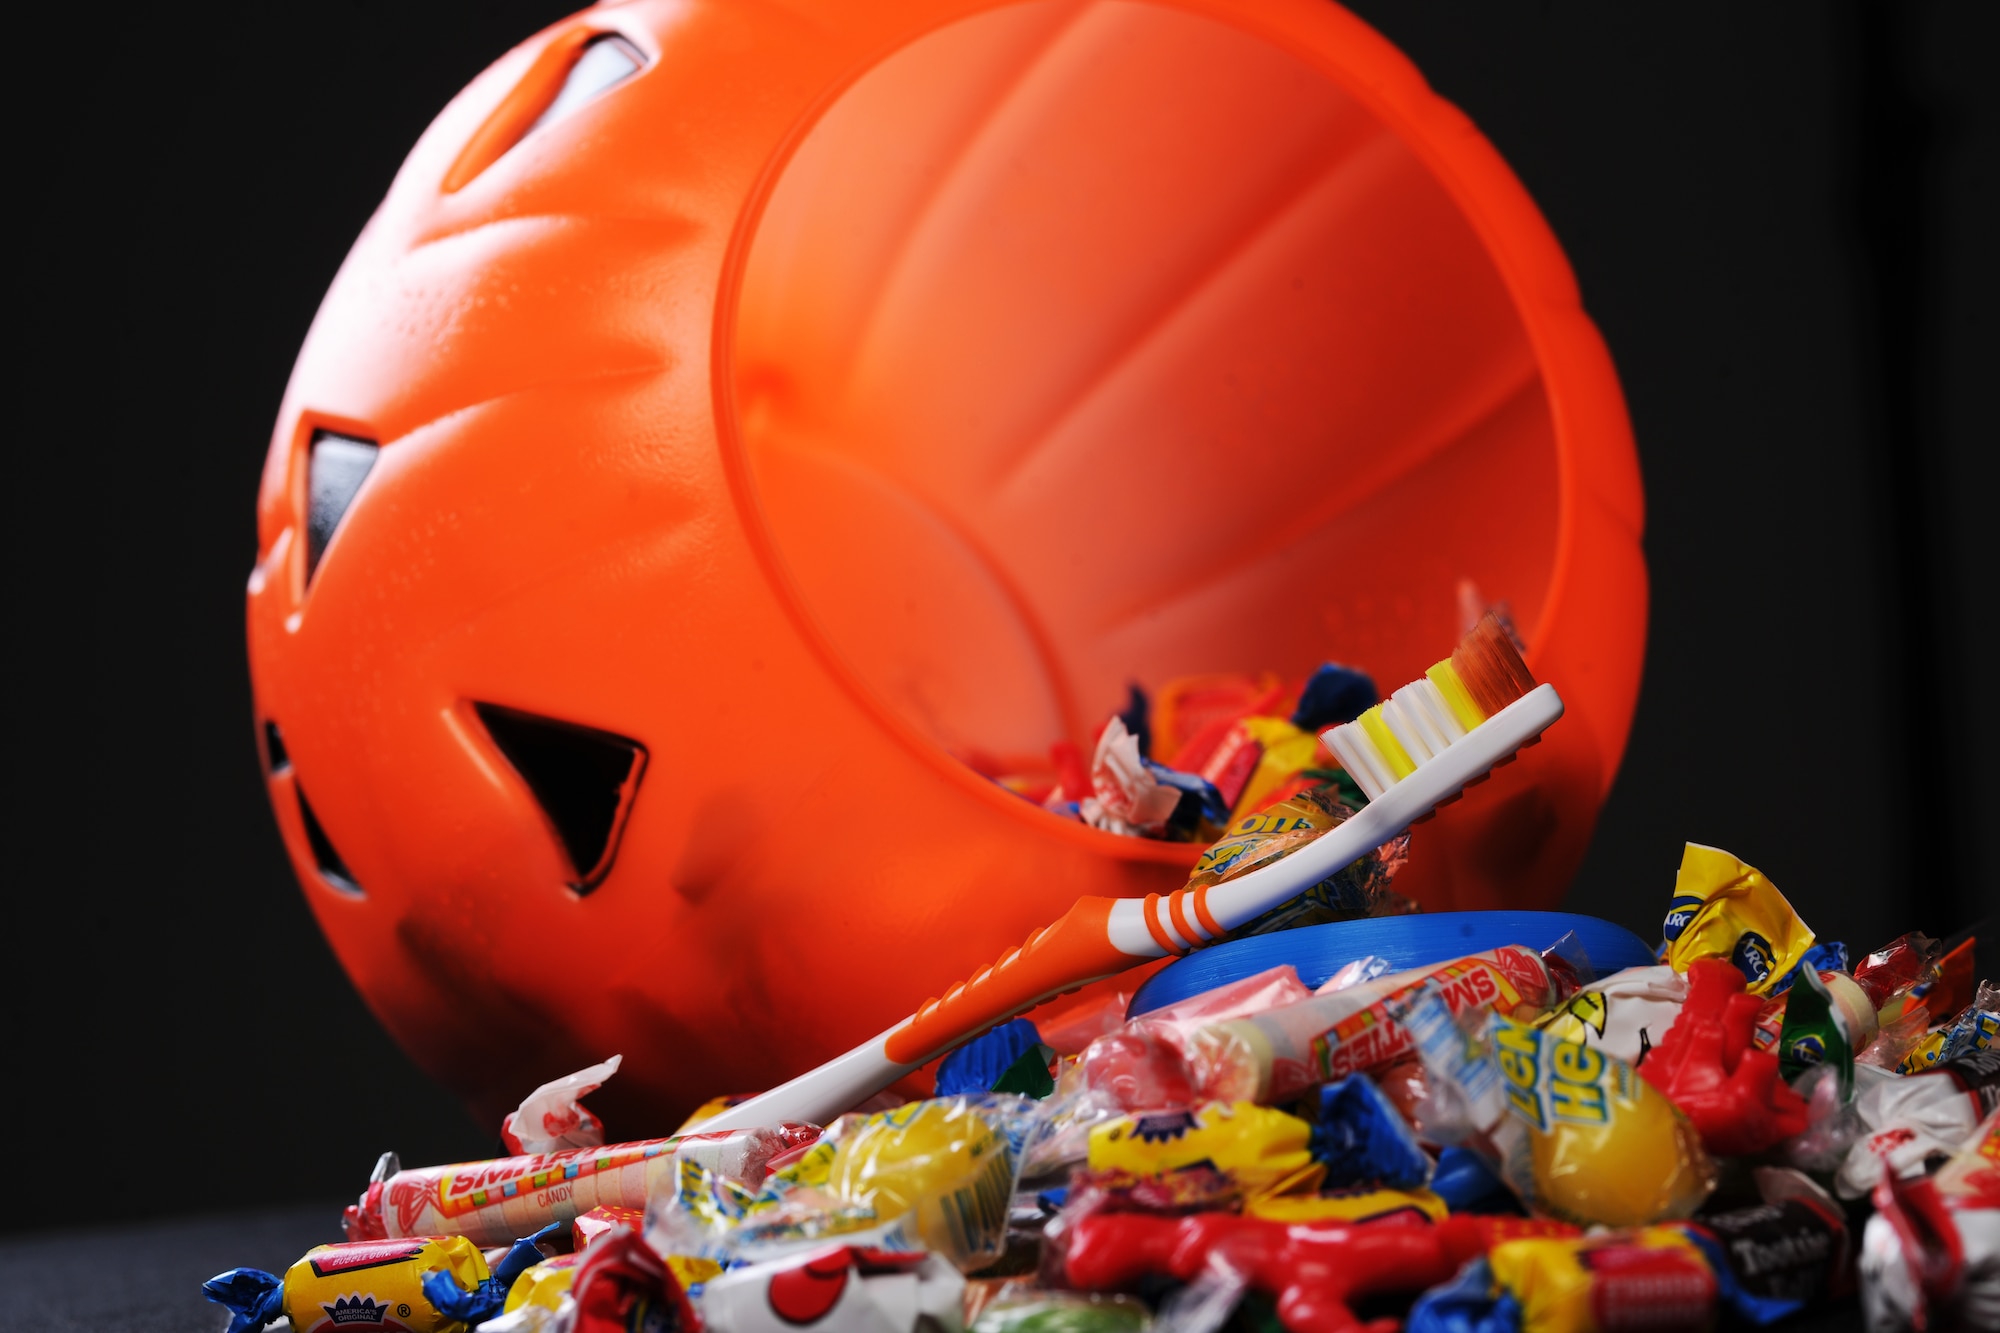 The 99th Dental Squadron is encouraging Airmen and their family members to develop an oral hygiene plan when eating candy during Halloween in order to prevent cavities. For cavities to form, four specific factors must be present concurrently: a susceptible tooth surface, cavity-forming bacteria, sugar and time. (U.S. Air Force photo illustration by Airman 1st Class Jason Couillard)